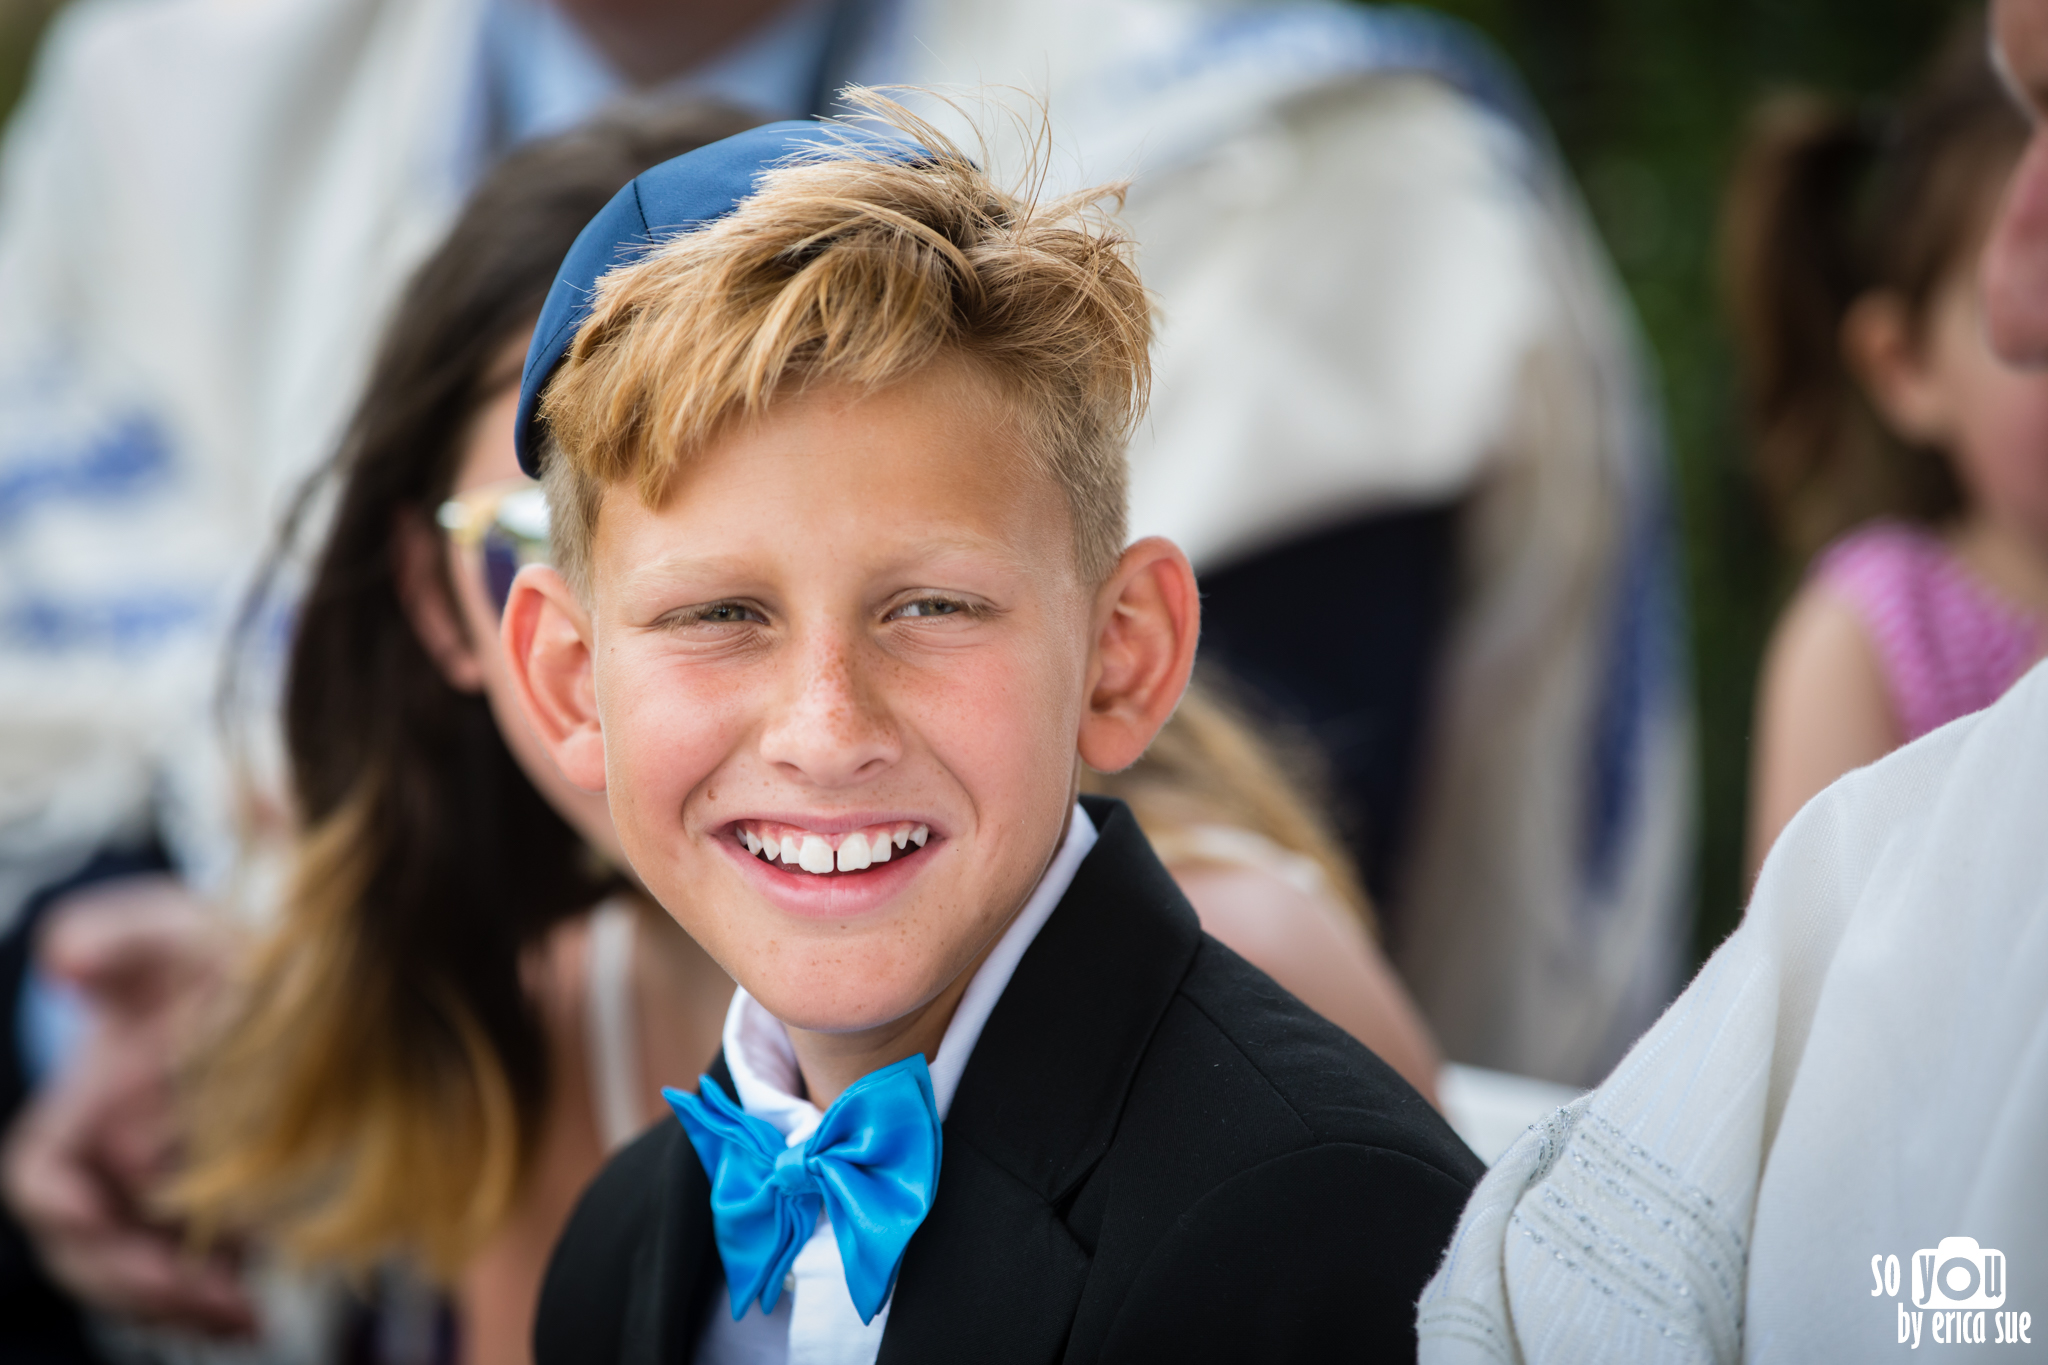 bar-mitzvah-photography-ft-lauderdale-so-you-by-erica-sue-7867.jpg